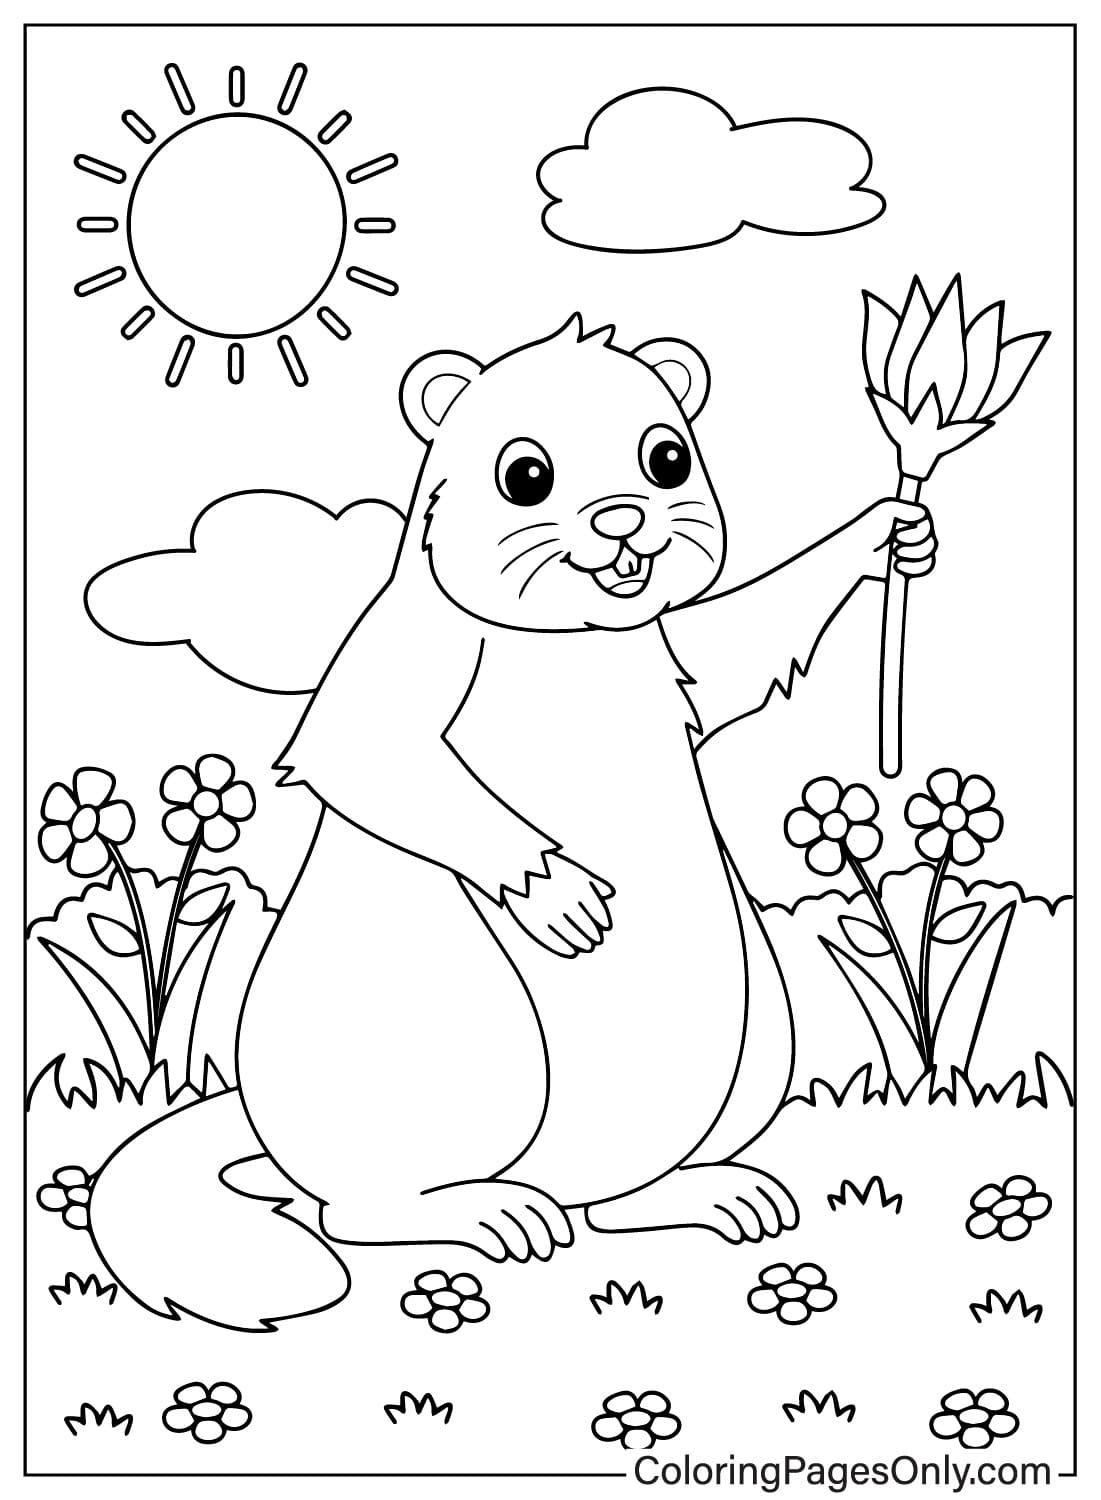 Groundhog Coloring Page from Groundhog Day